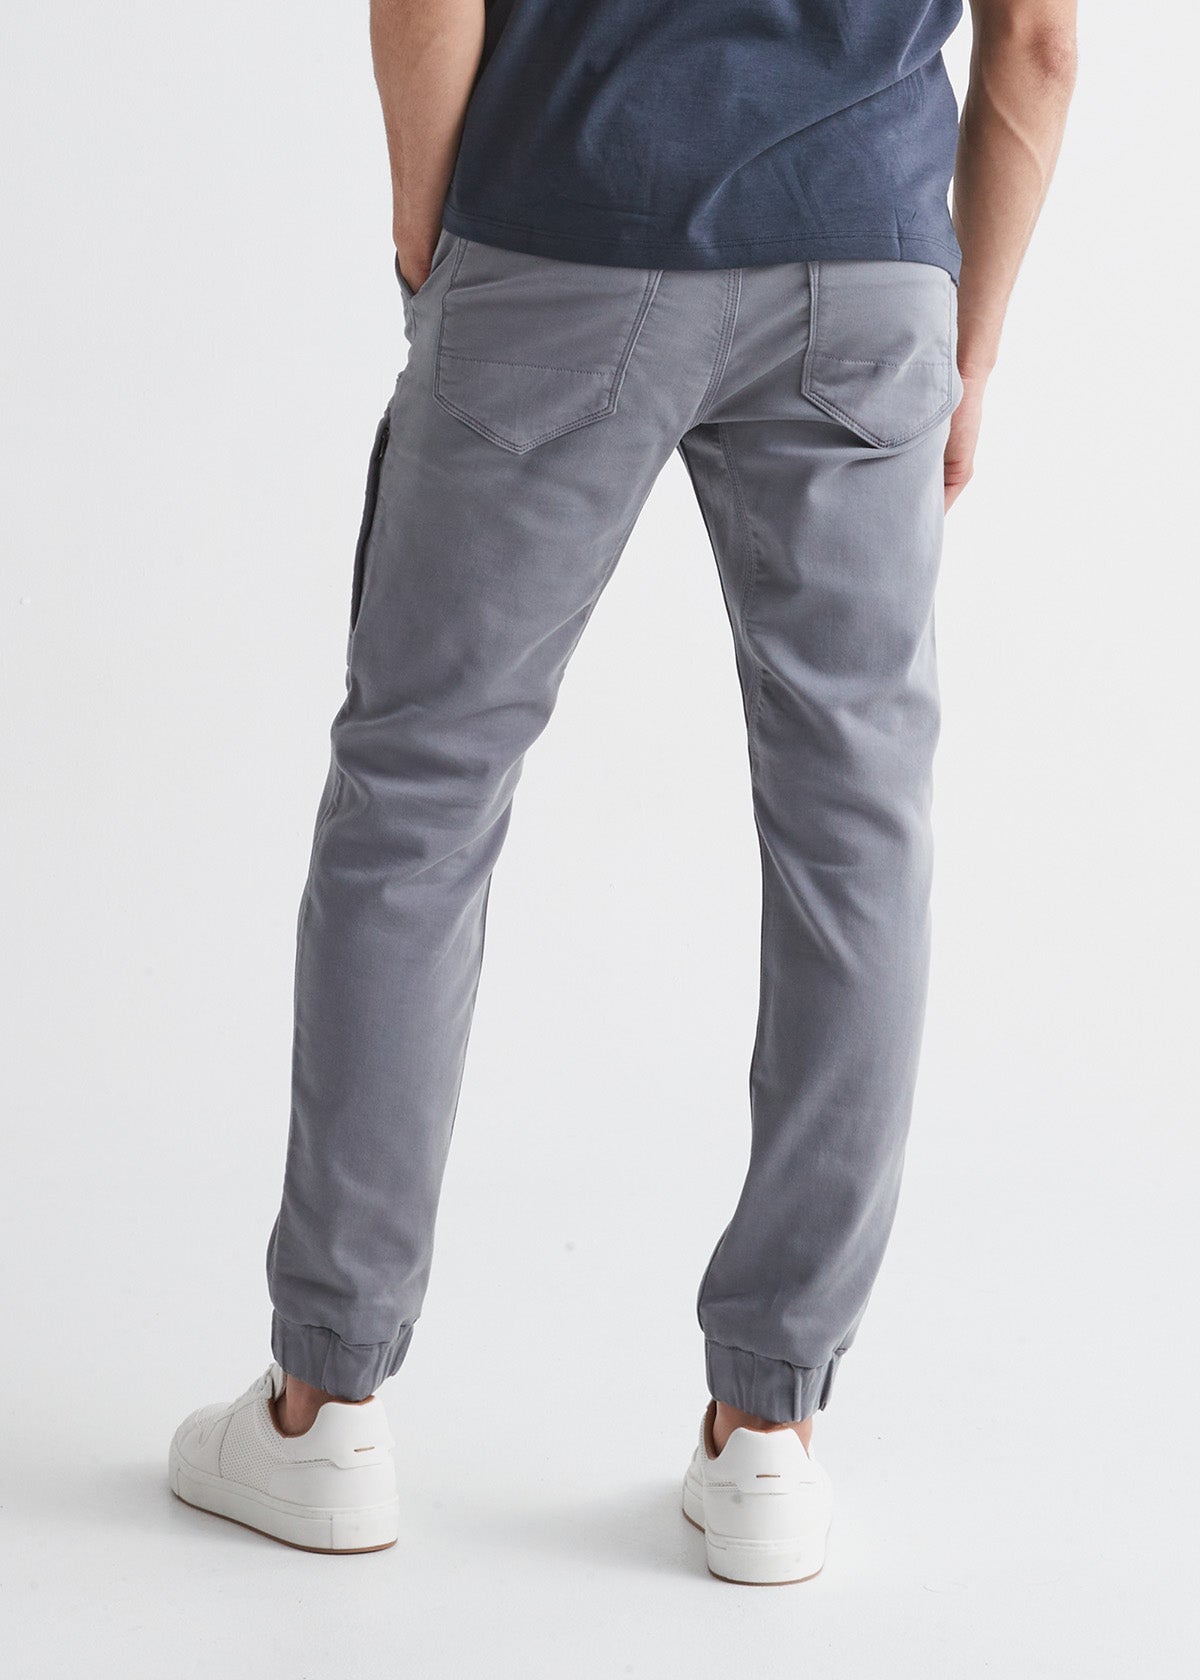 NWT Women's Nine West Active Fitted Jogger With Zipper Pocket-Grey